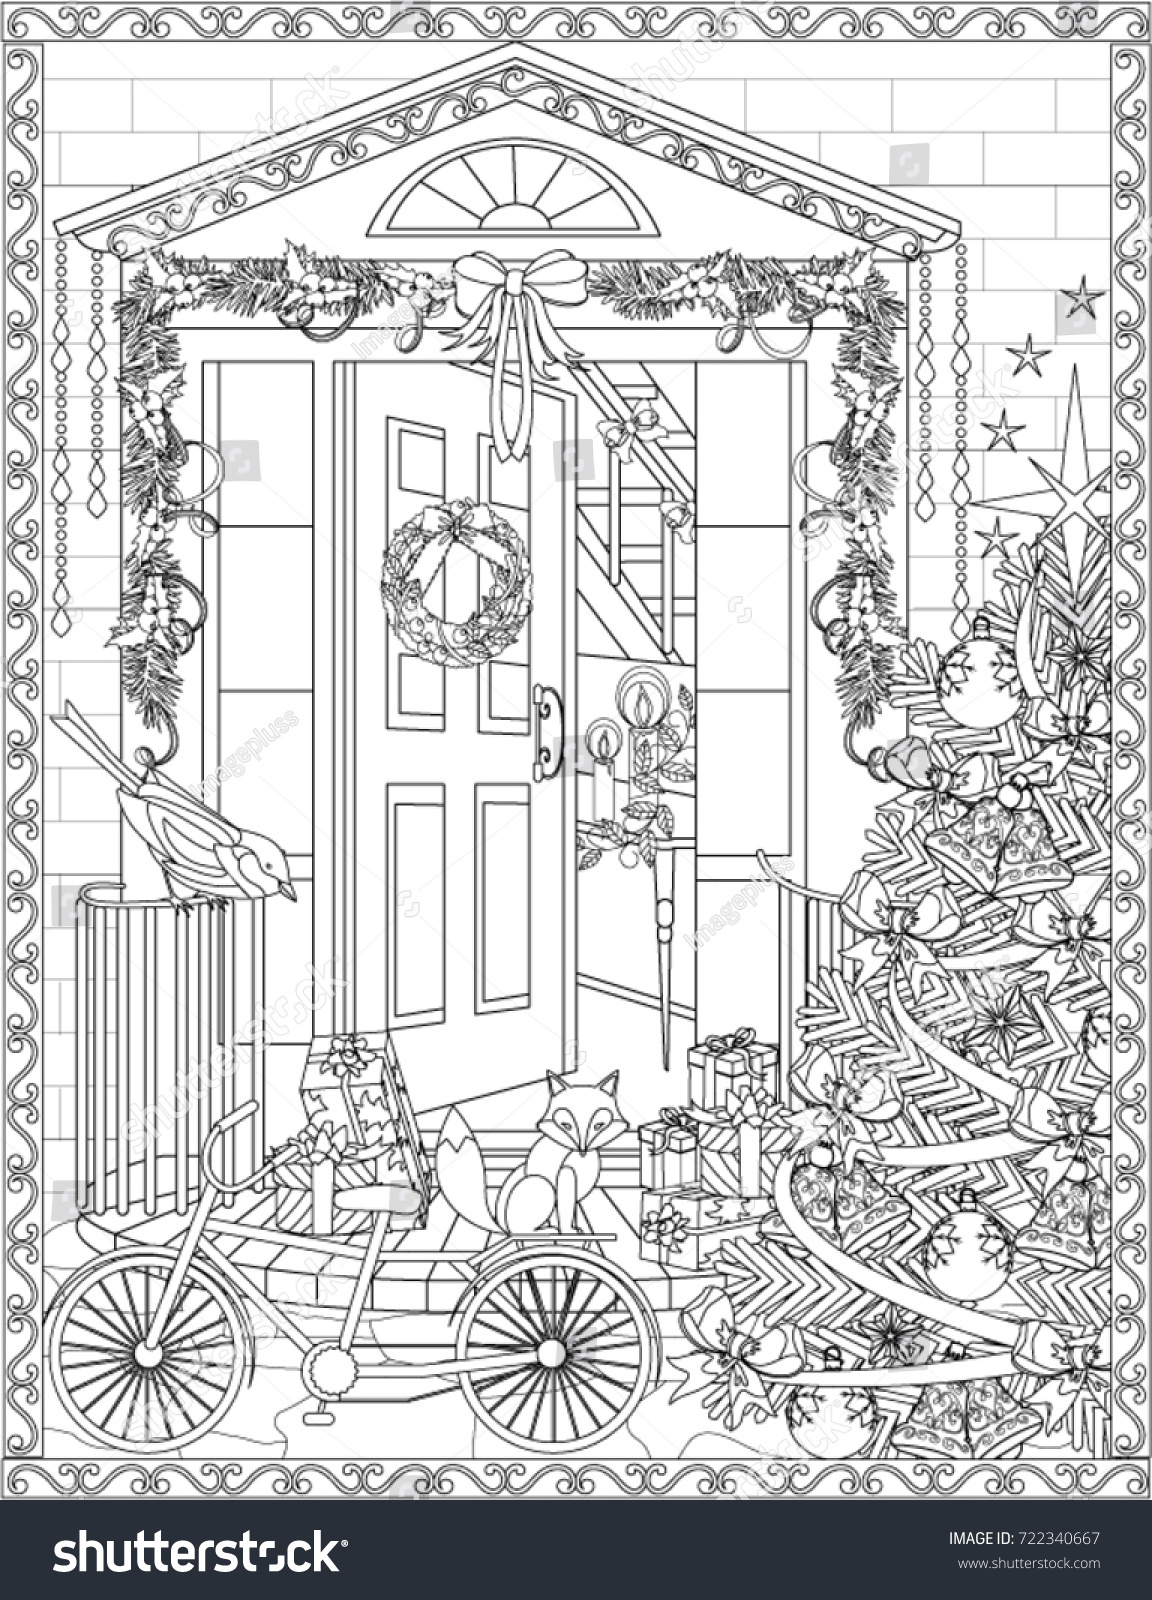 Christmas Coloring Book Page Stock Vector 722340667 - Shutterstock